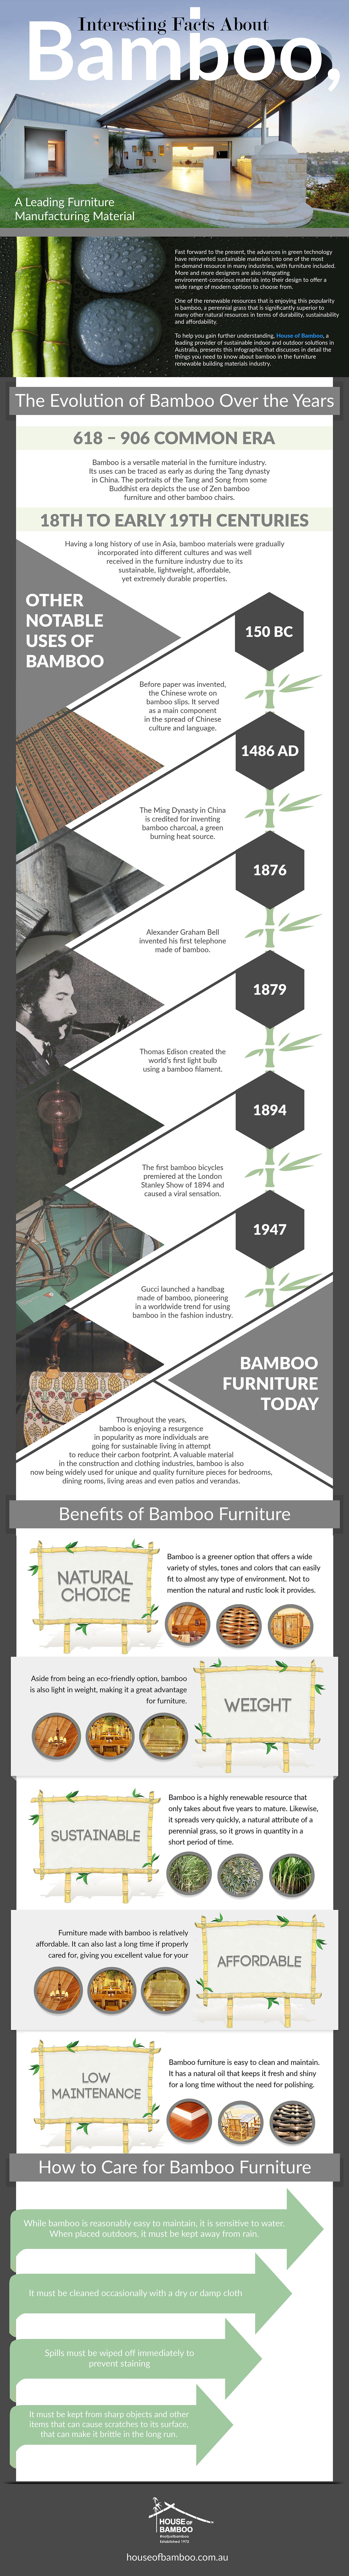 Interesting Facts about Bamboo, a Leading Furniture Manufacturing Material